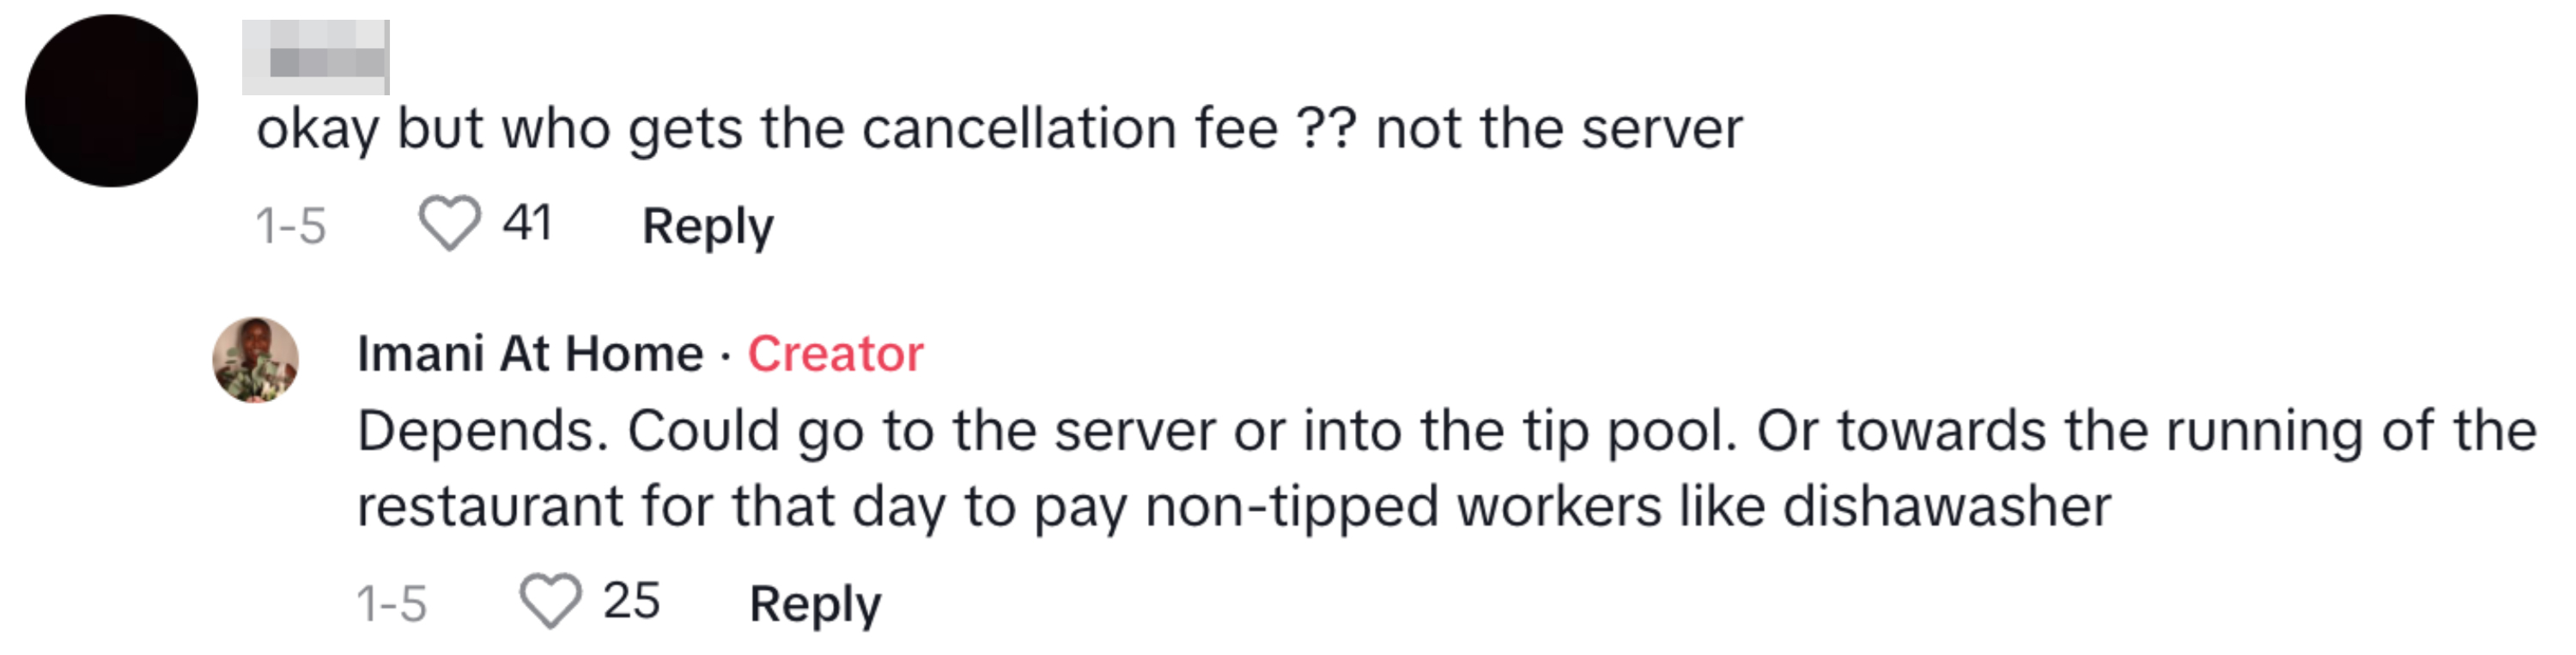 Comment thread discussing who should get a cancellation fee at a restaurant, either the server or non-tipped staff